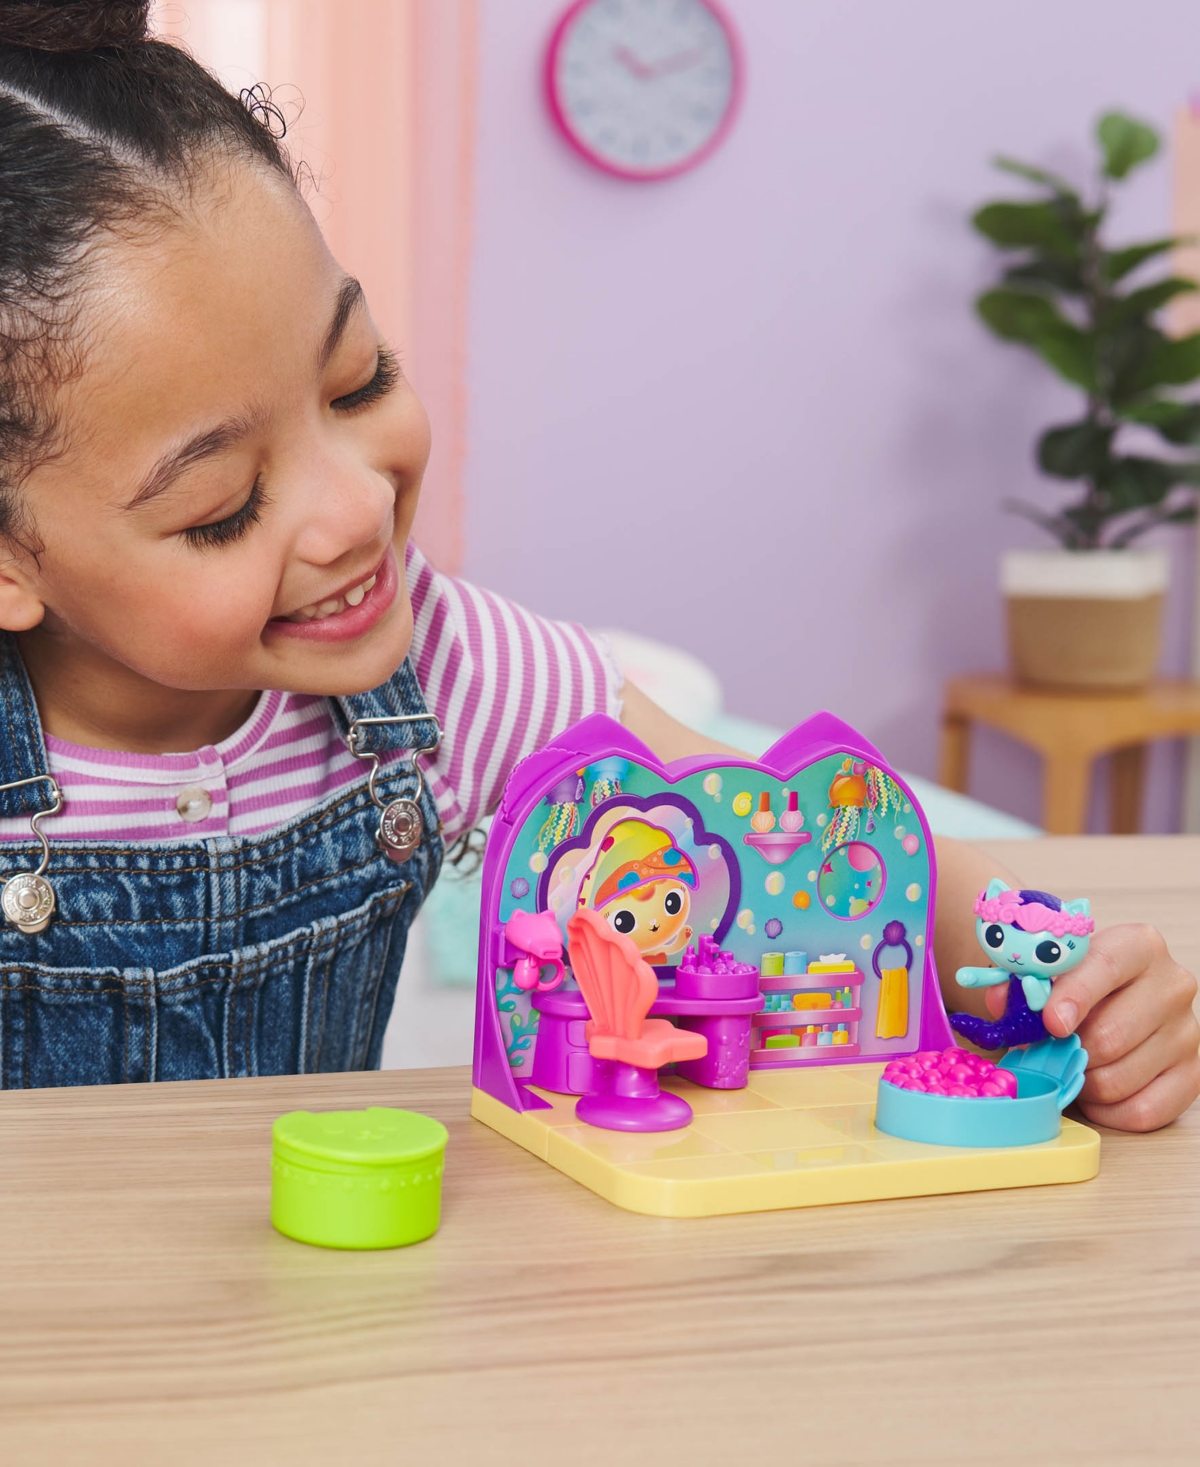 Shop Gabby's Dollhouse Dreamworks, Mercat's Spa Room Playset, With Mercat Toy Figure, Surprise Toys And Dollhouse Furniture In Multi-color